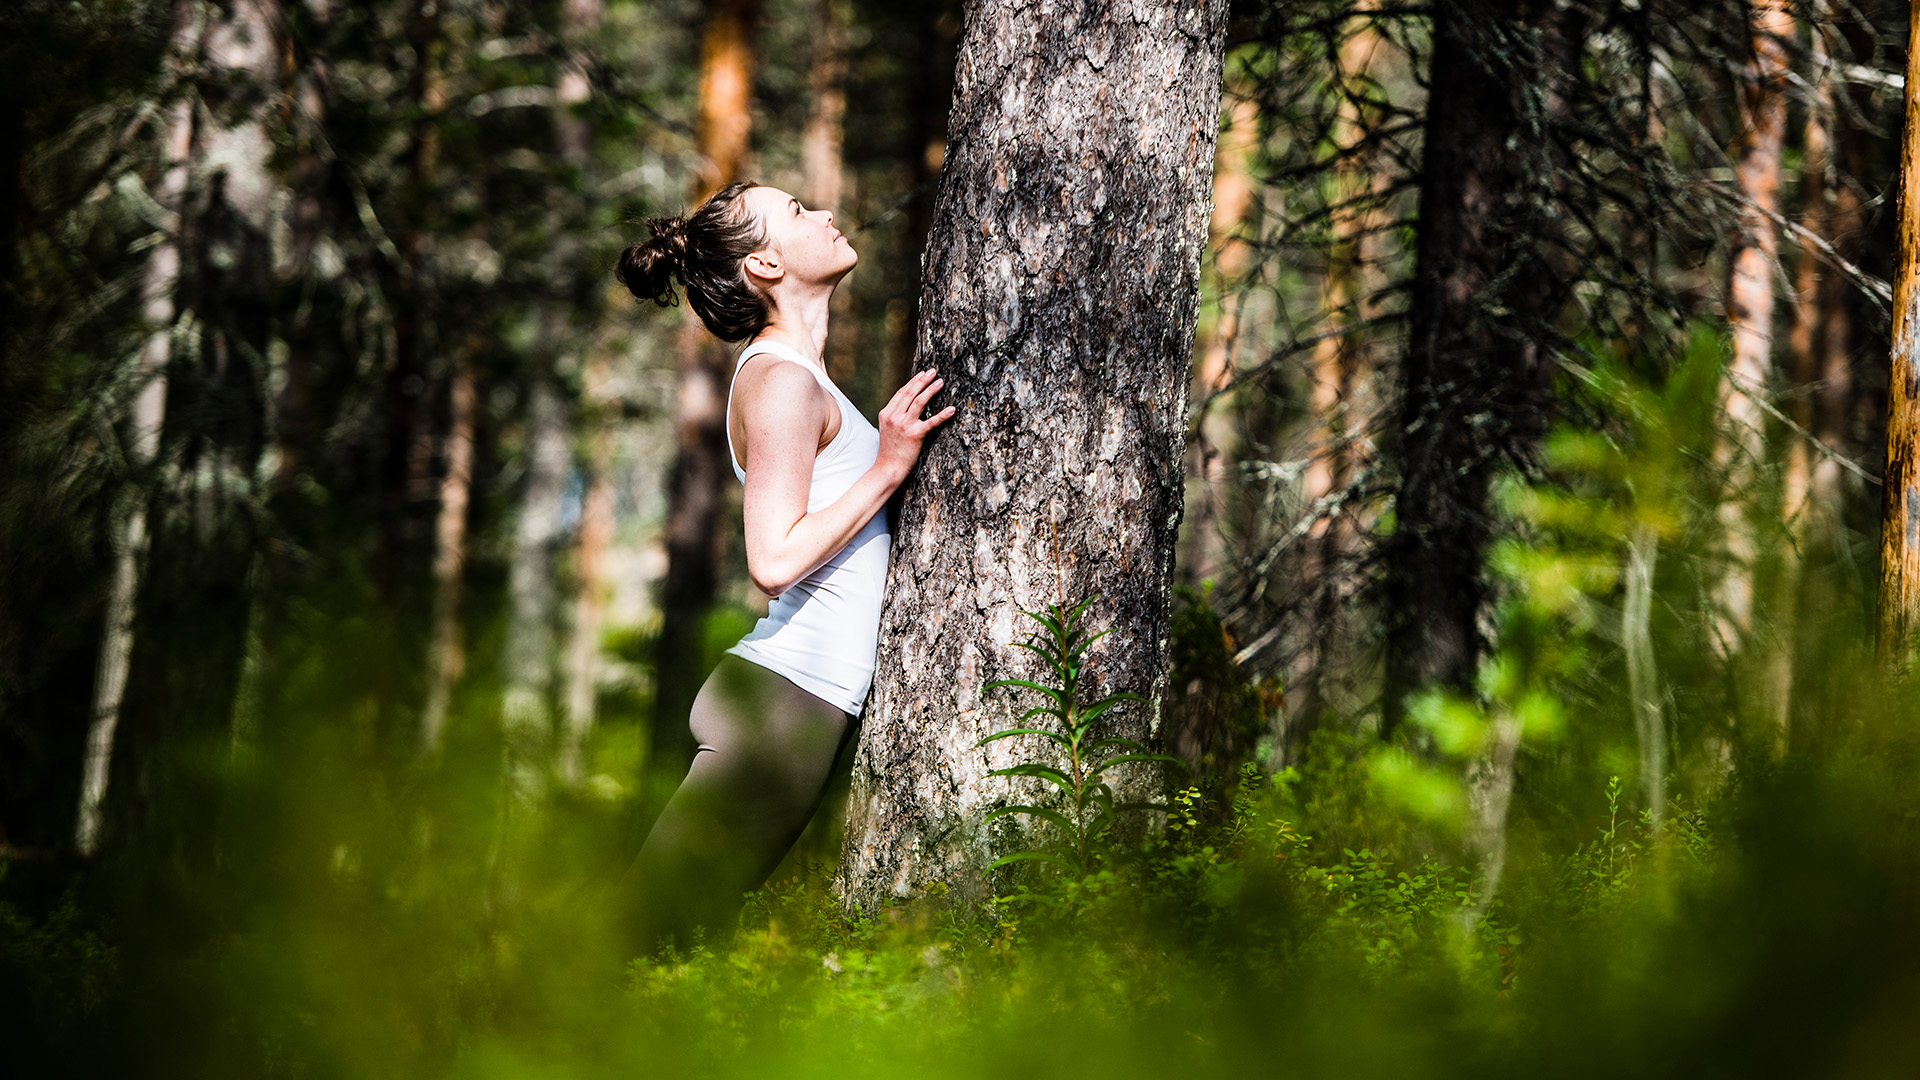 A woman enjoying the wellbeing from the forest of Lapland.